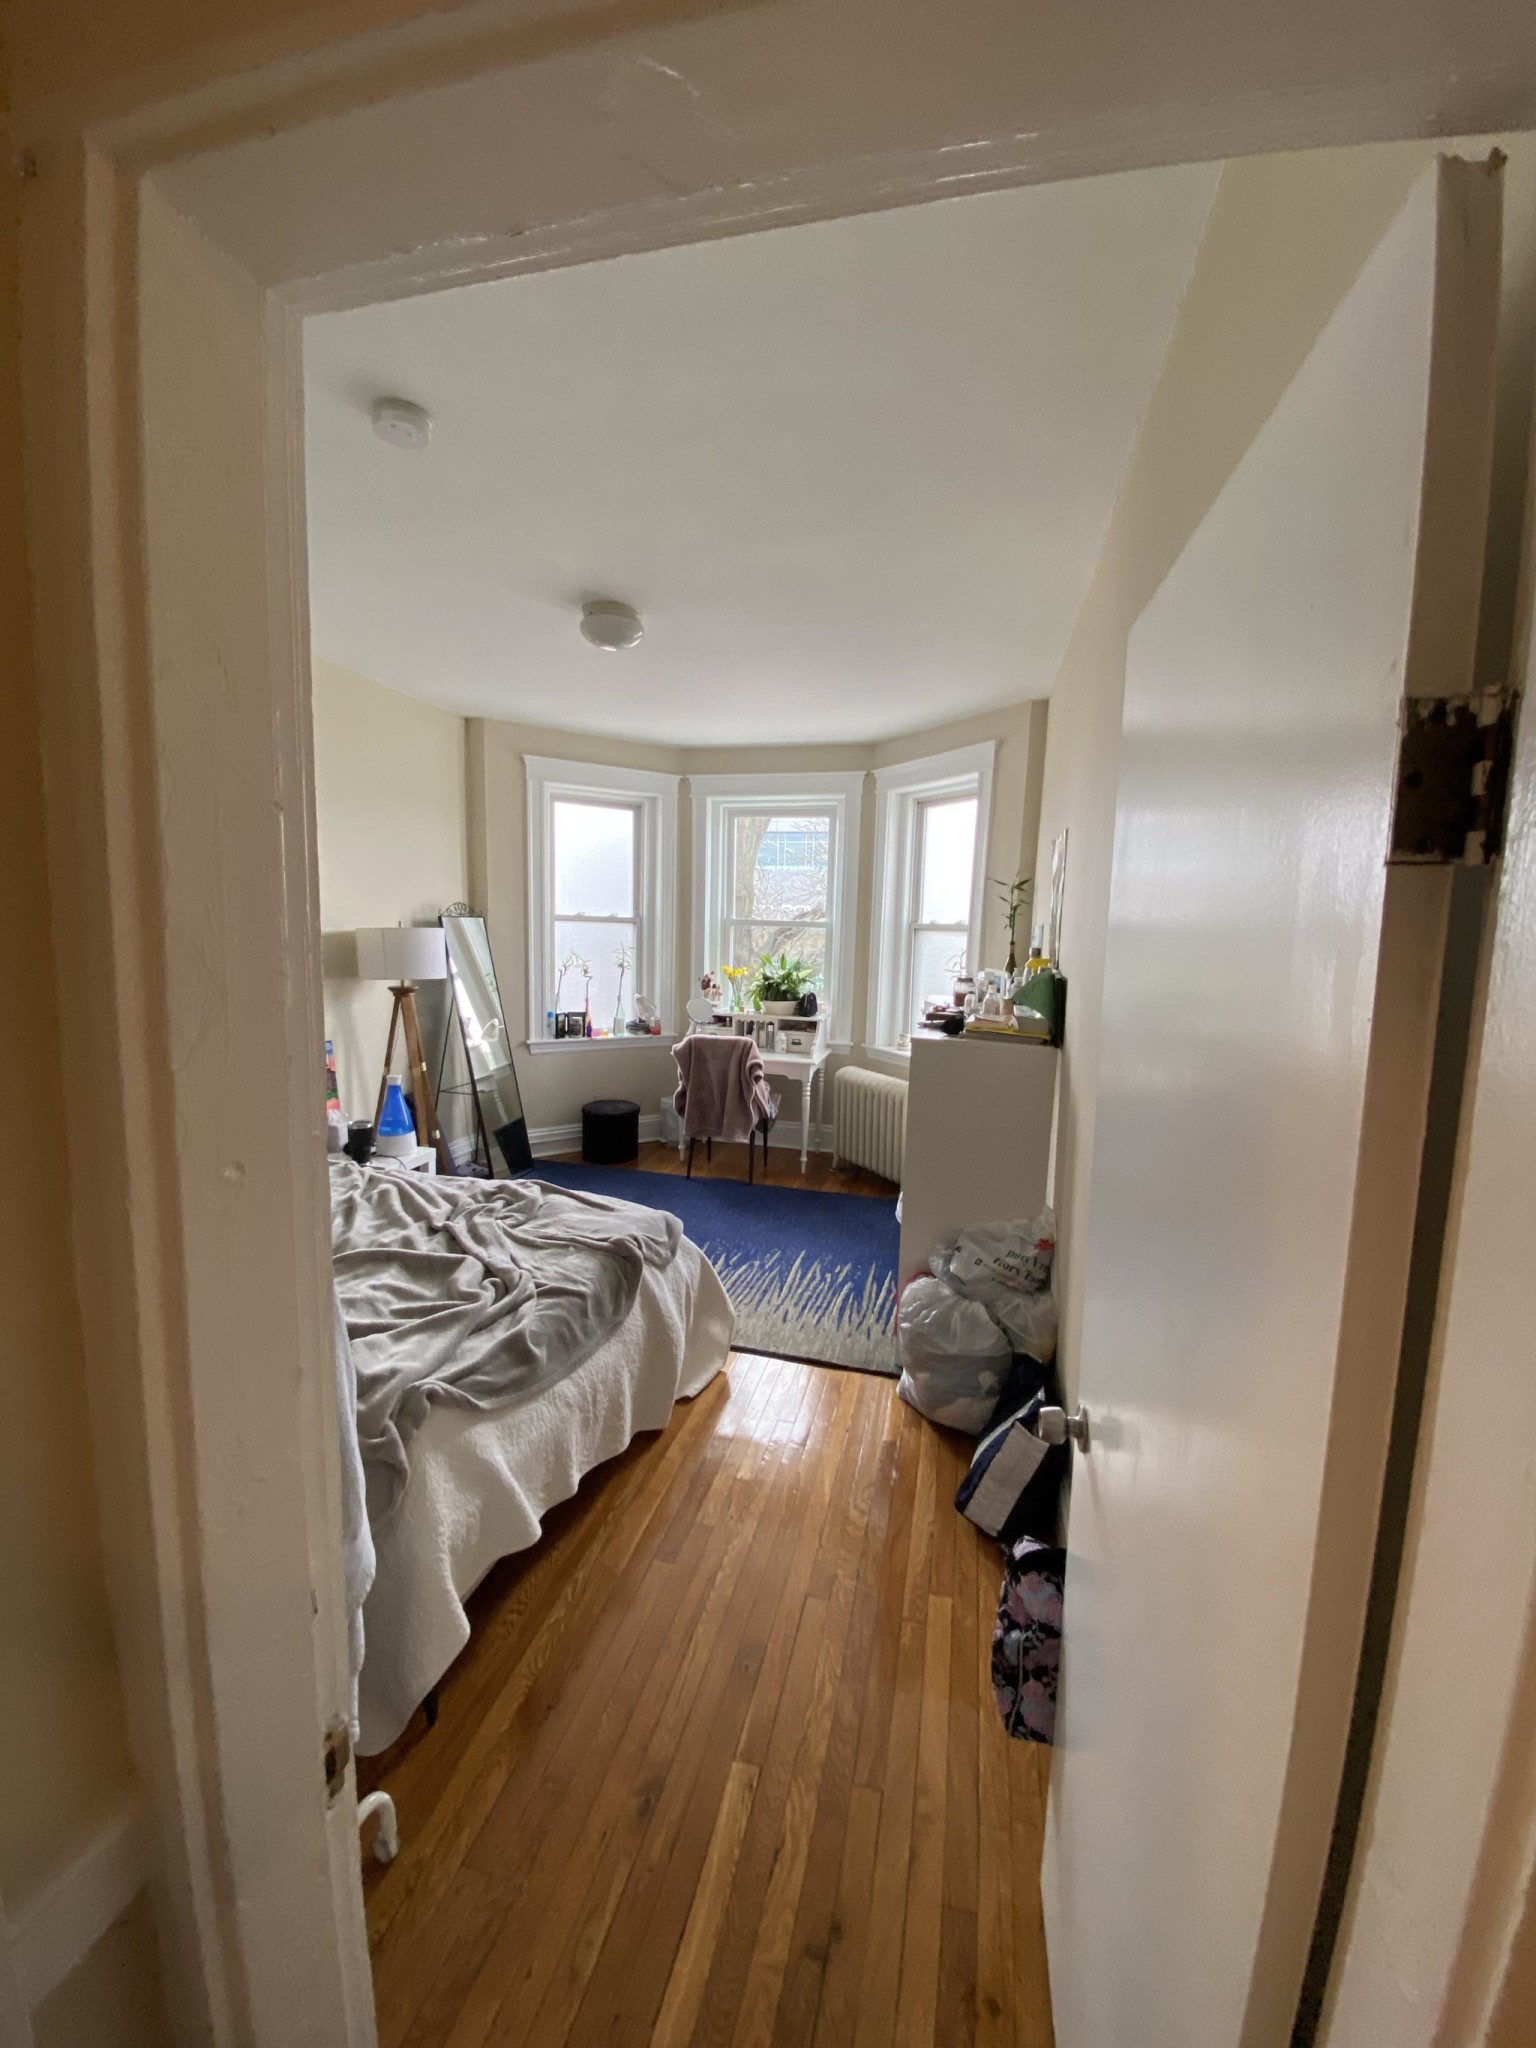 Photos of apartment on Commonwealth Ave.,Boston MA 02134